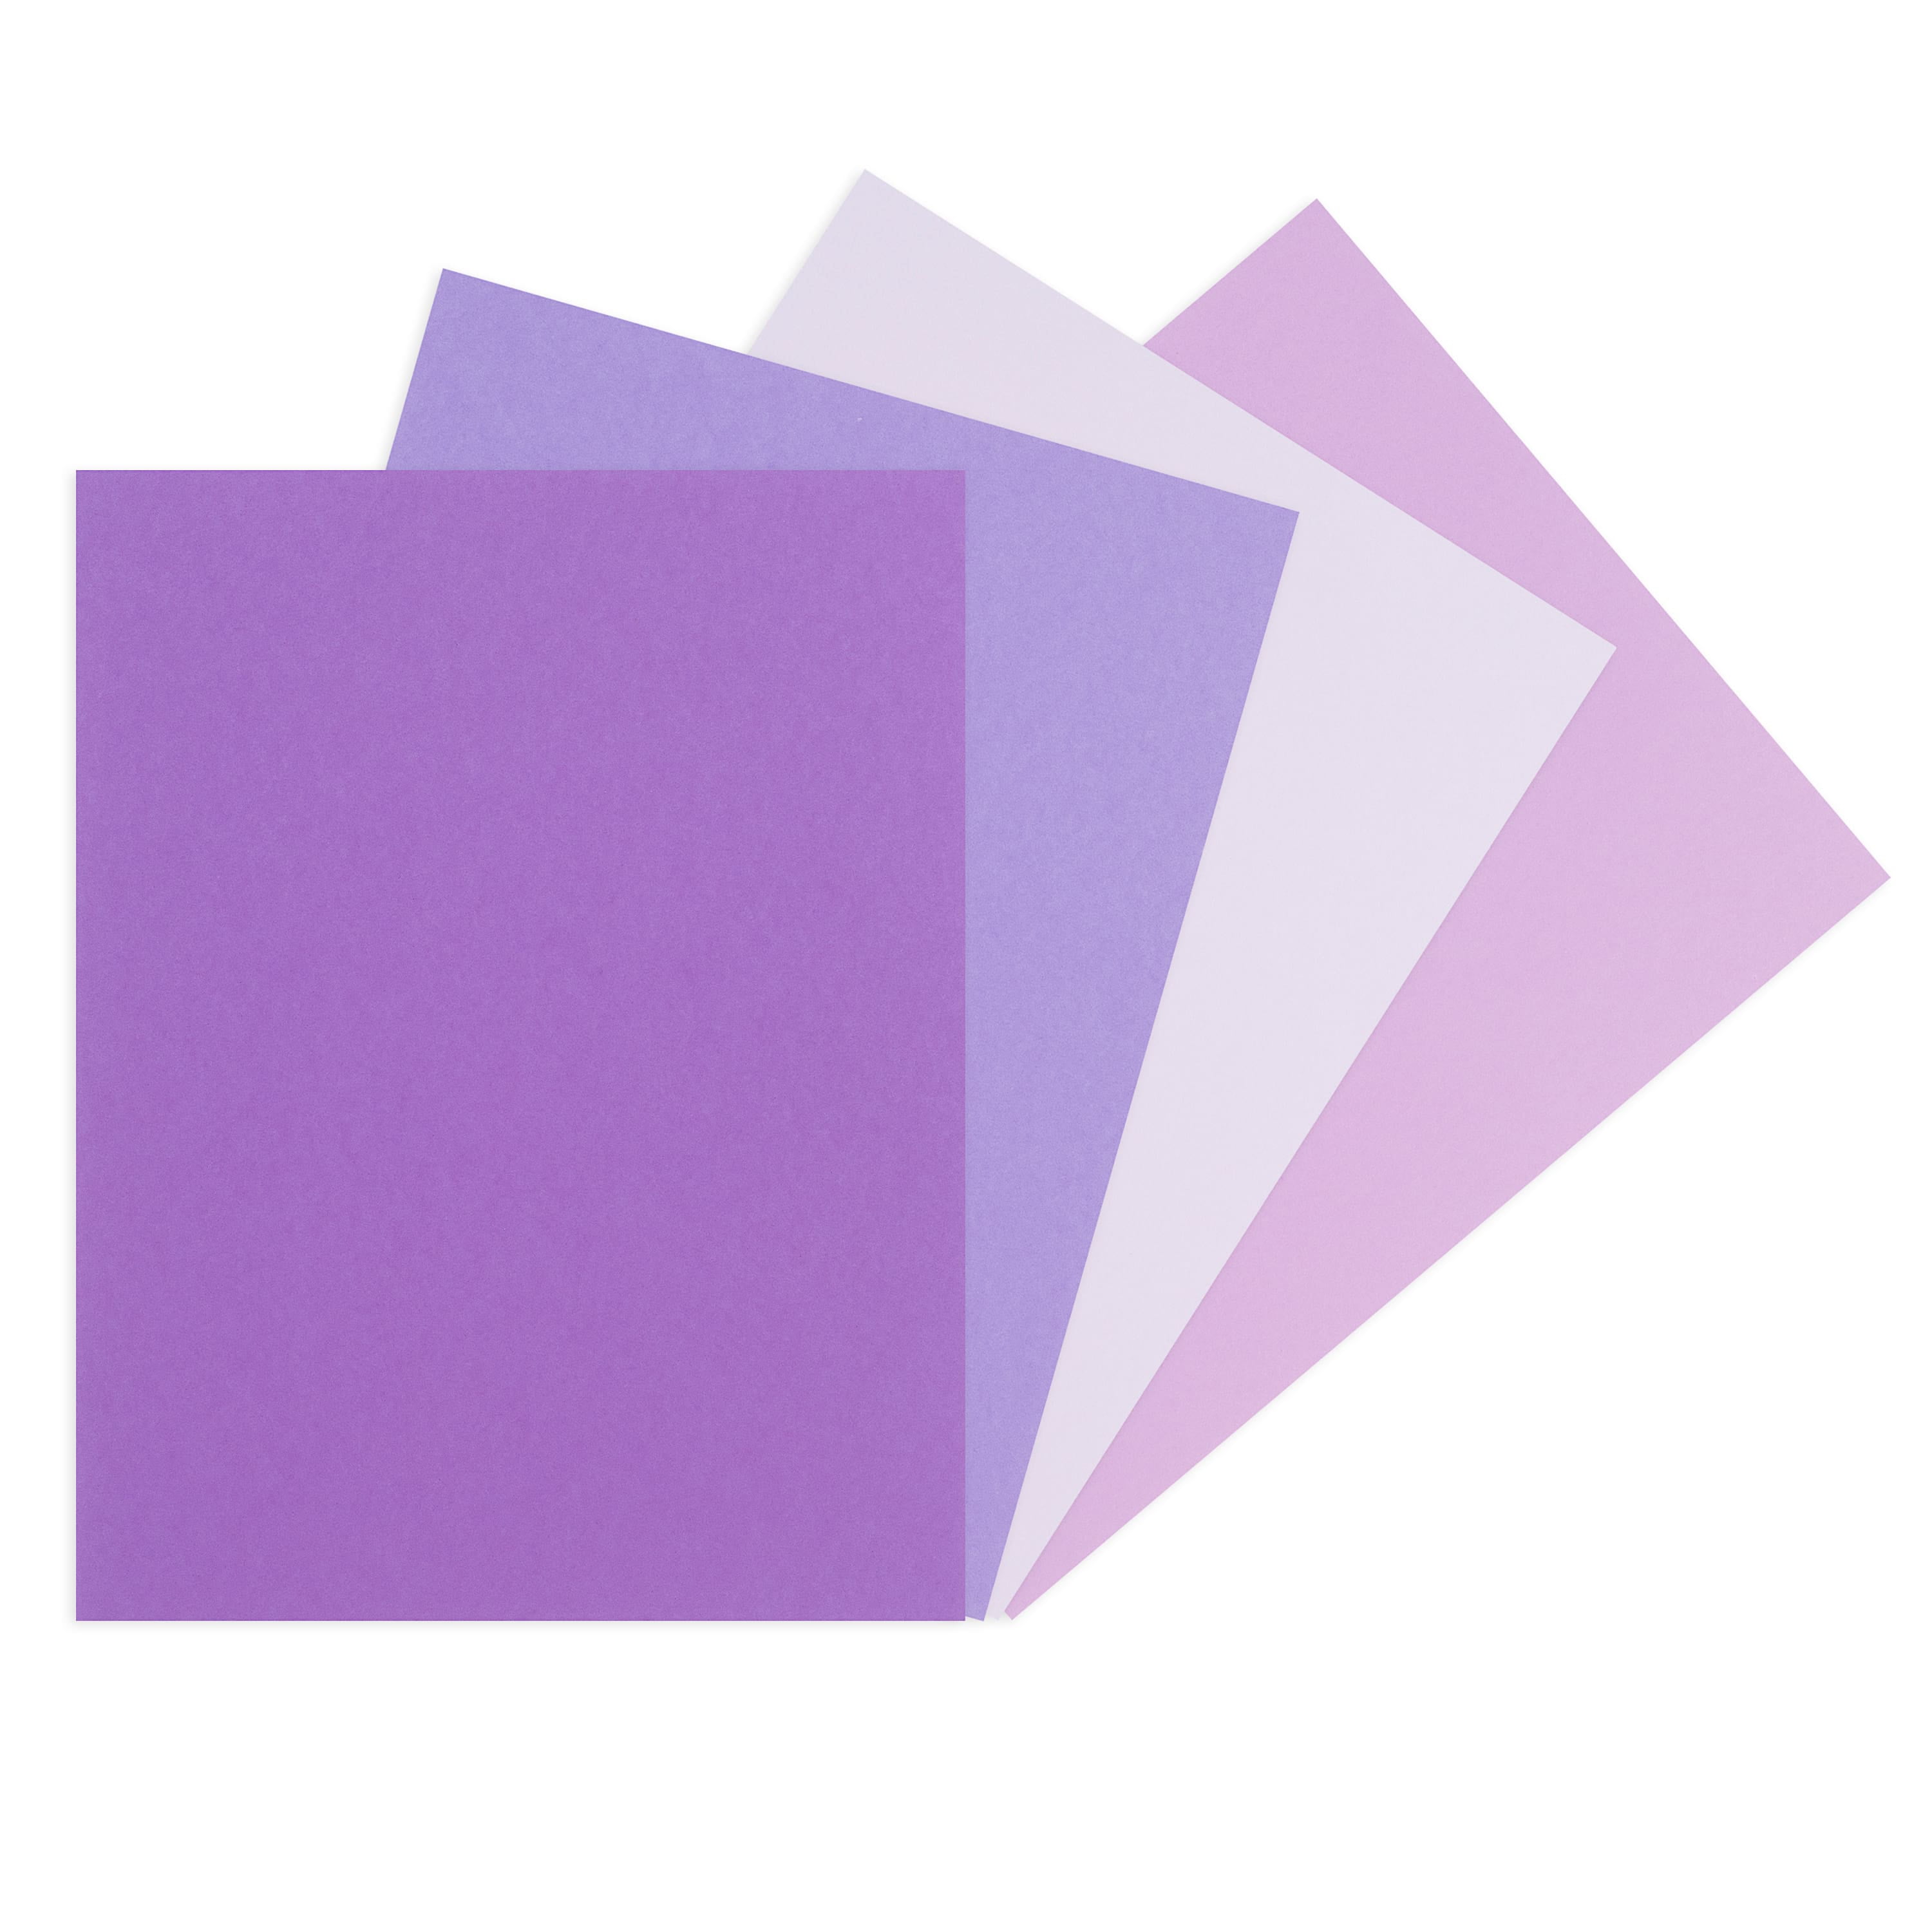 Clear 8.5 x 11 Vellum Paper by Recollections™, 100 Sheets, Michaels